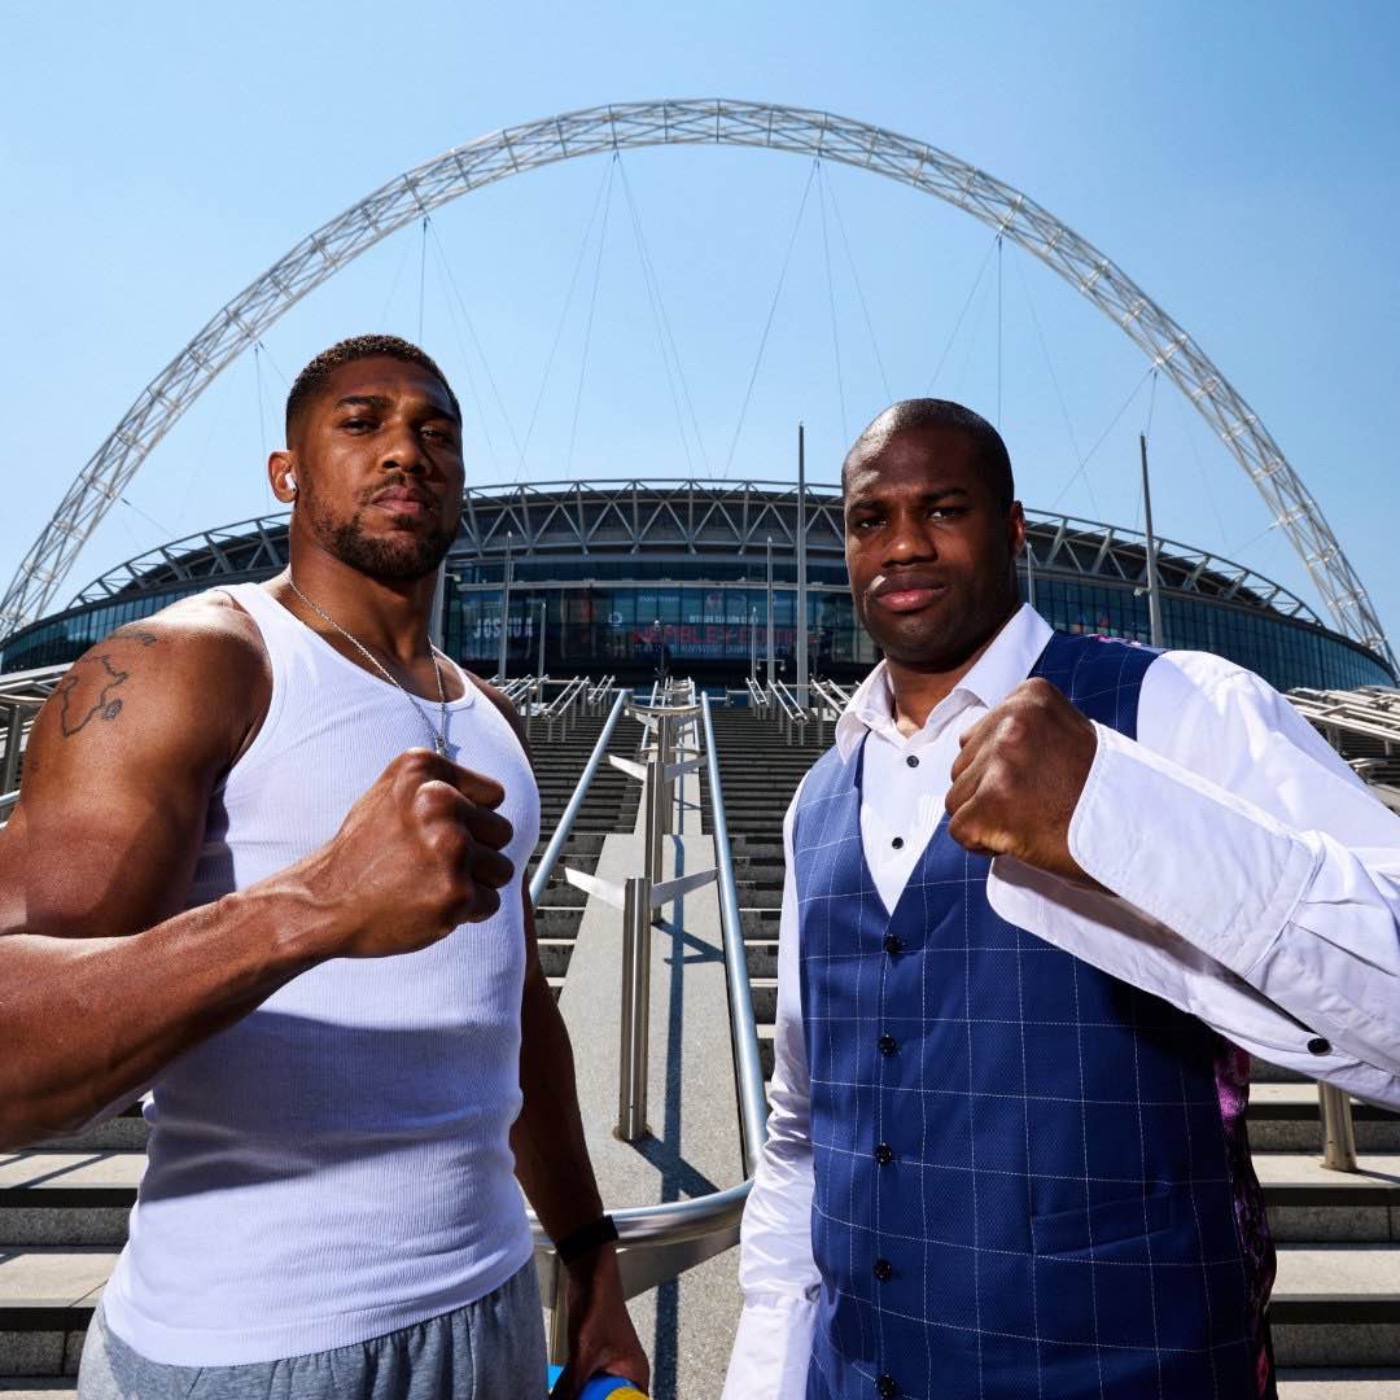 BOXING SPECIAL: AJ ANTHONY JOSHUA TO FIGHT DANIEL DUBOIS AT WEMBLEY REACTION